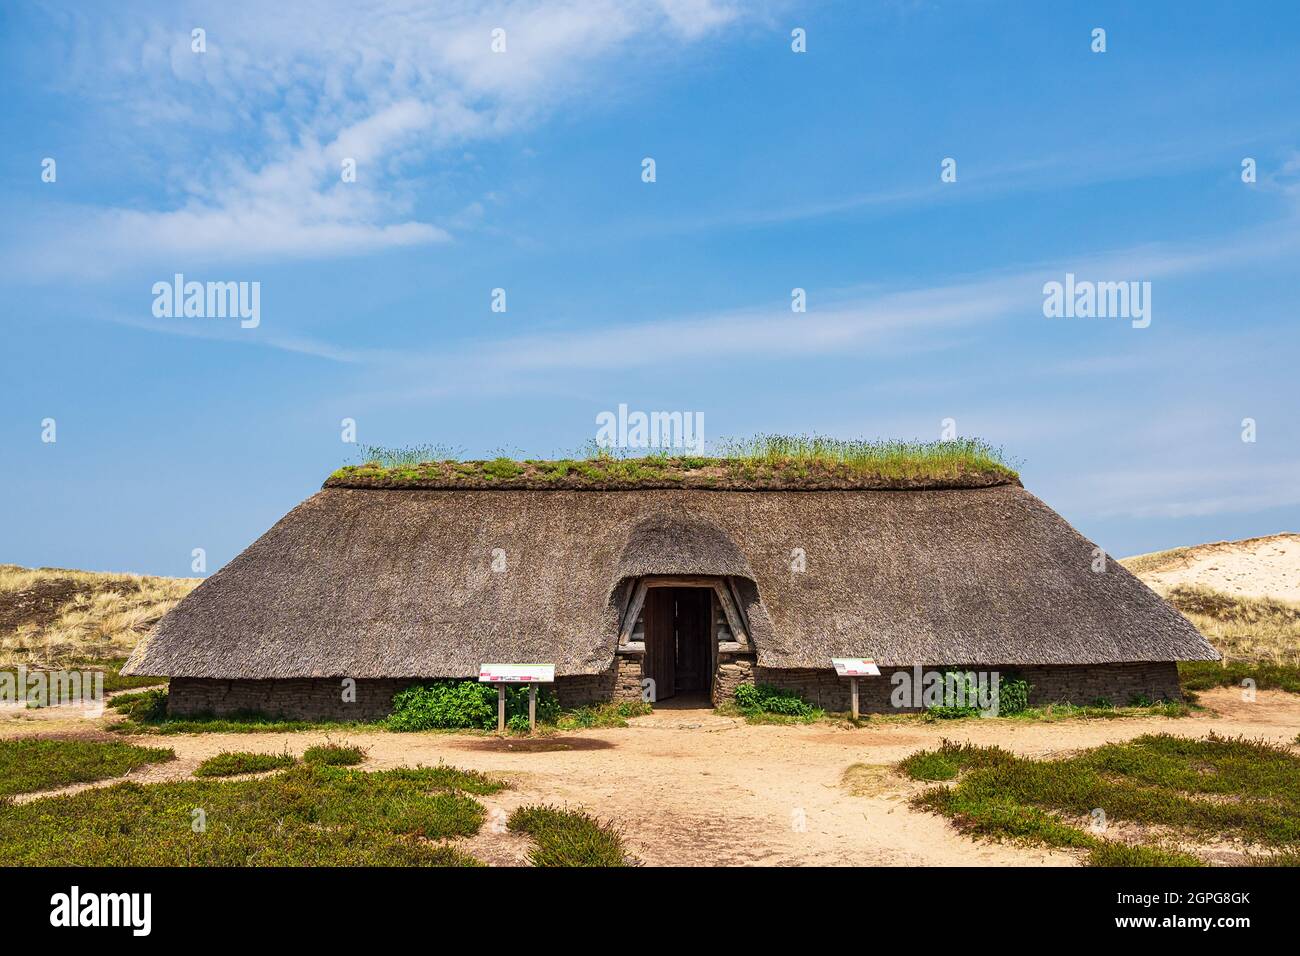 Historical building in the dunes near Nebel on the North Sea island Amrum, Germany. Stock Photo